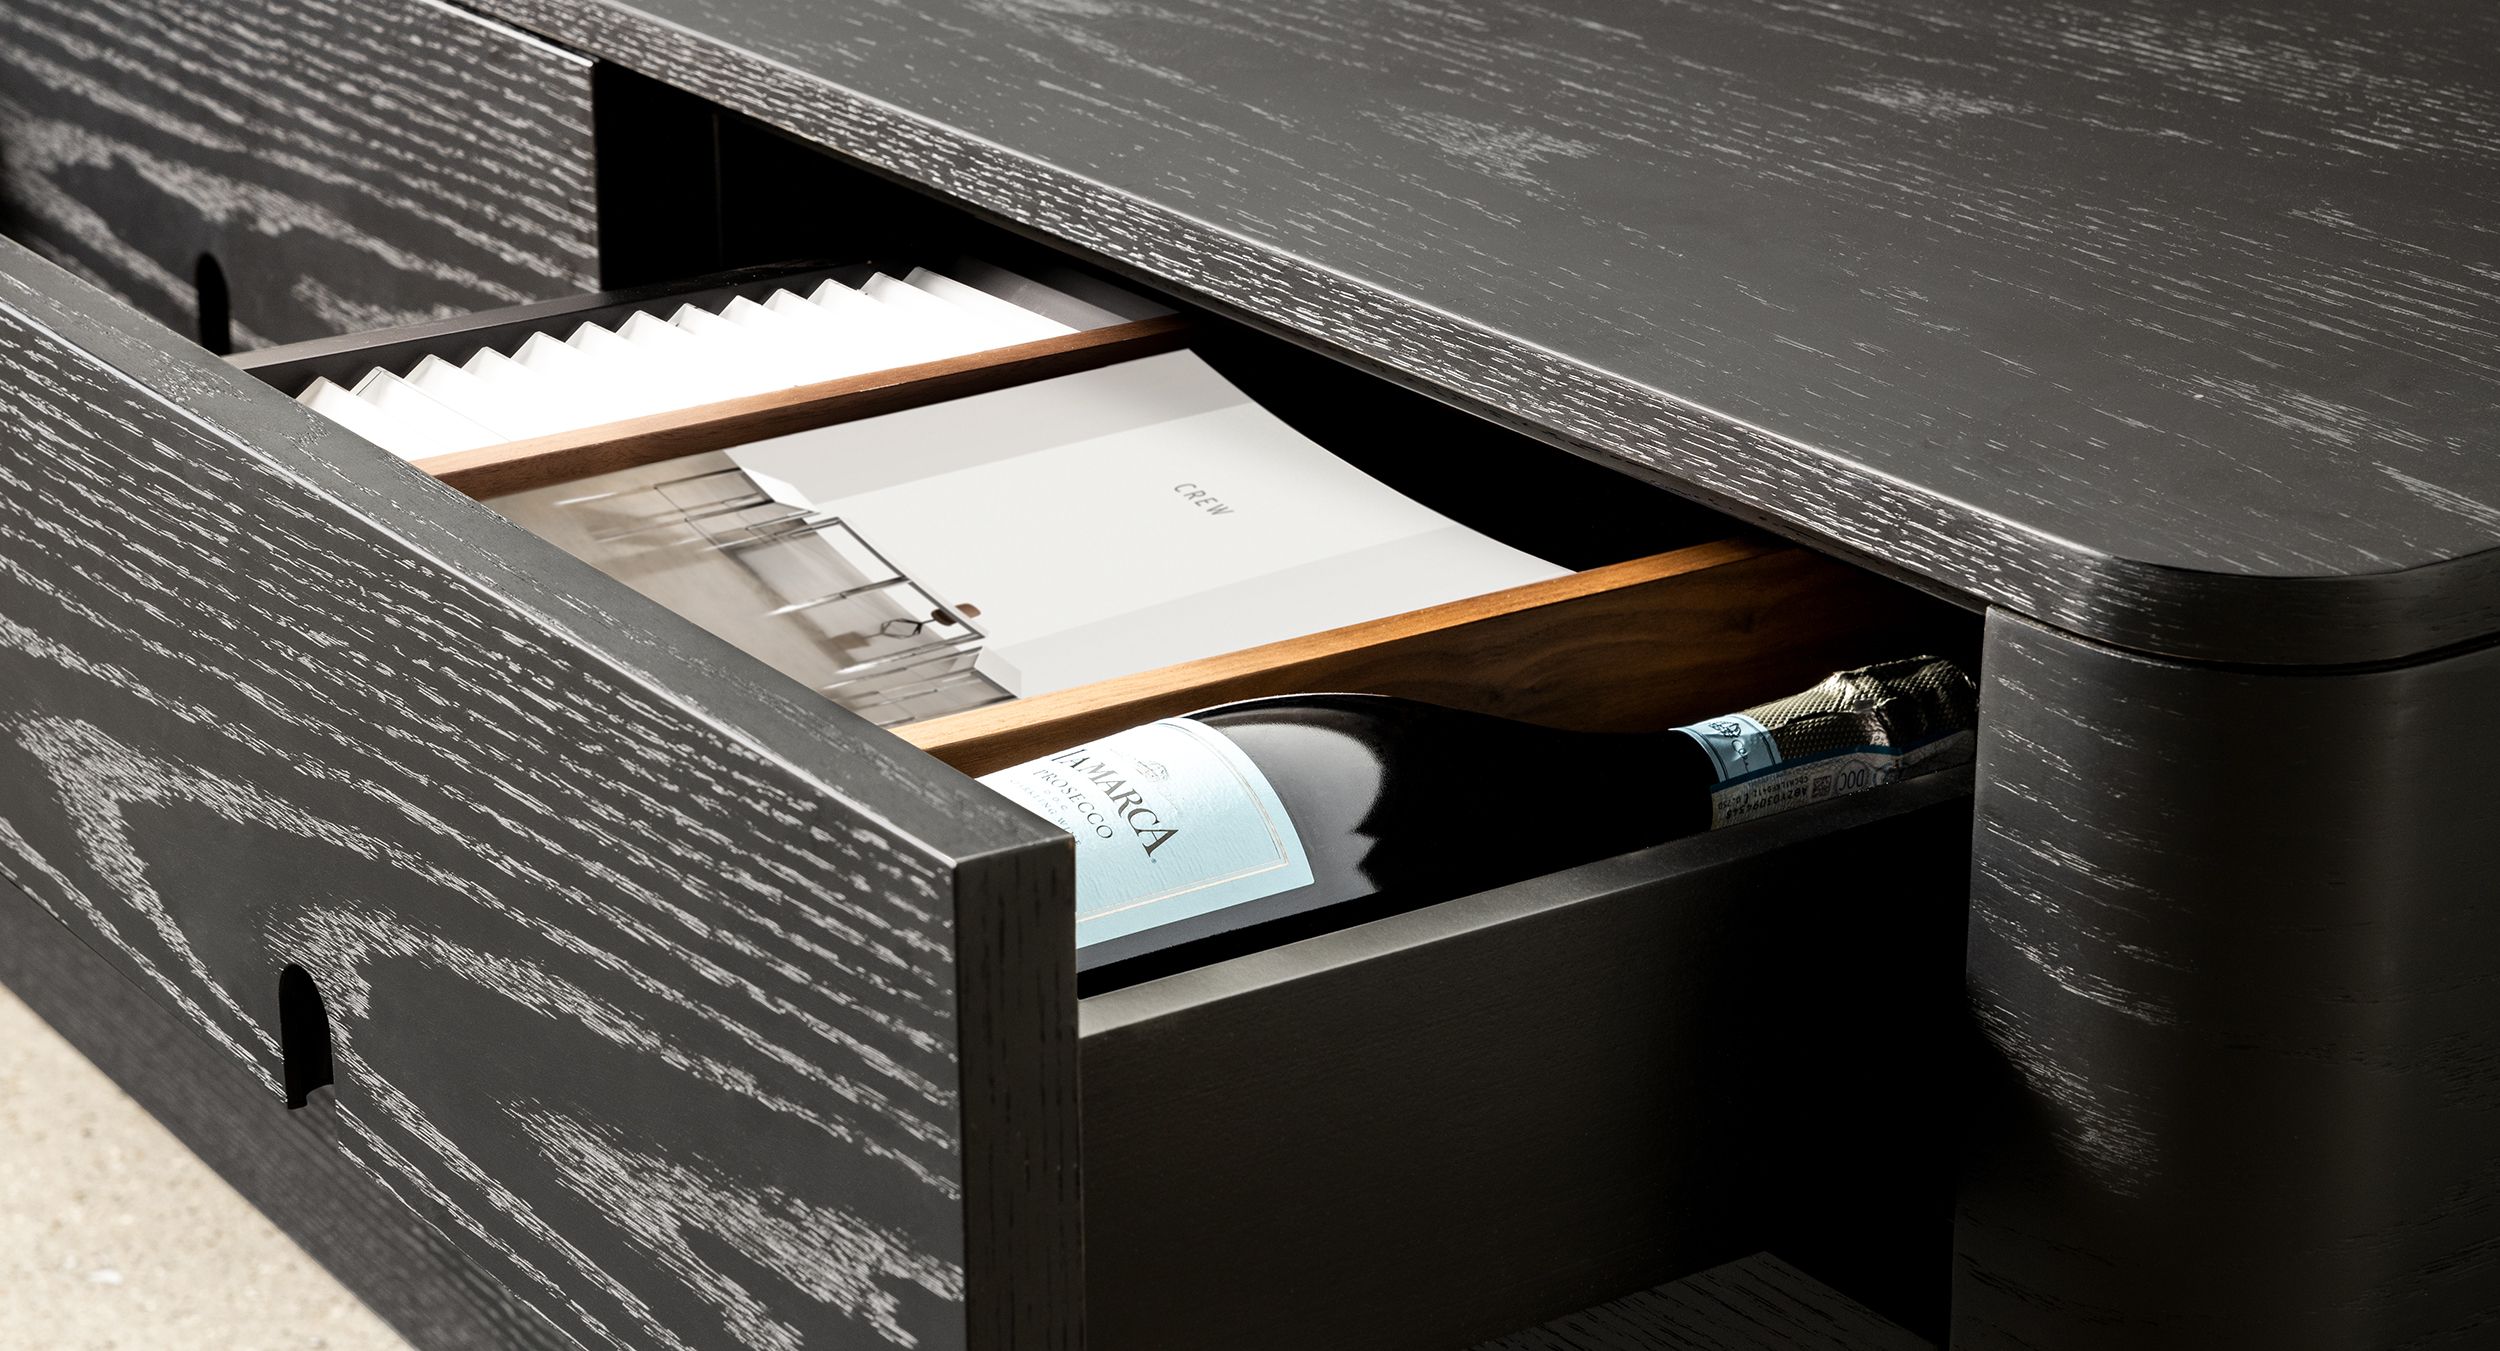 New adjustable magnetic dividers make thoughtful storage a breeze.